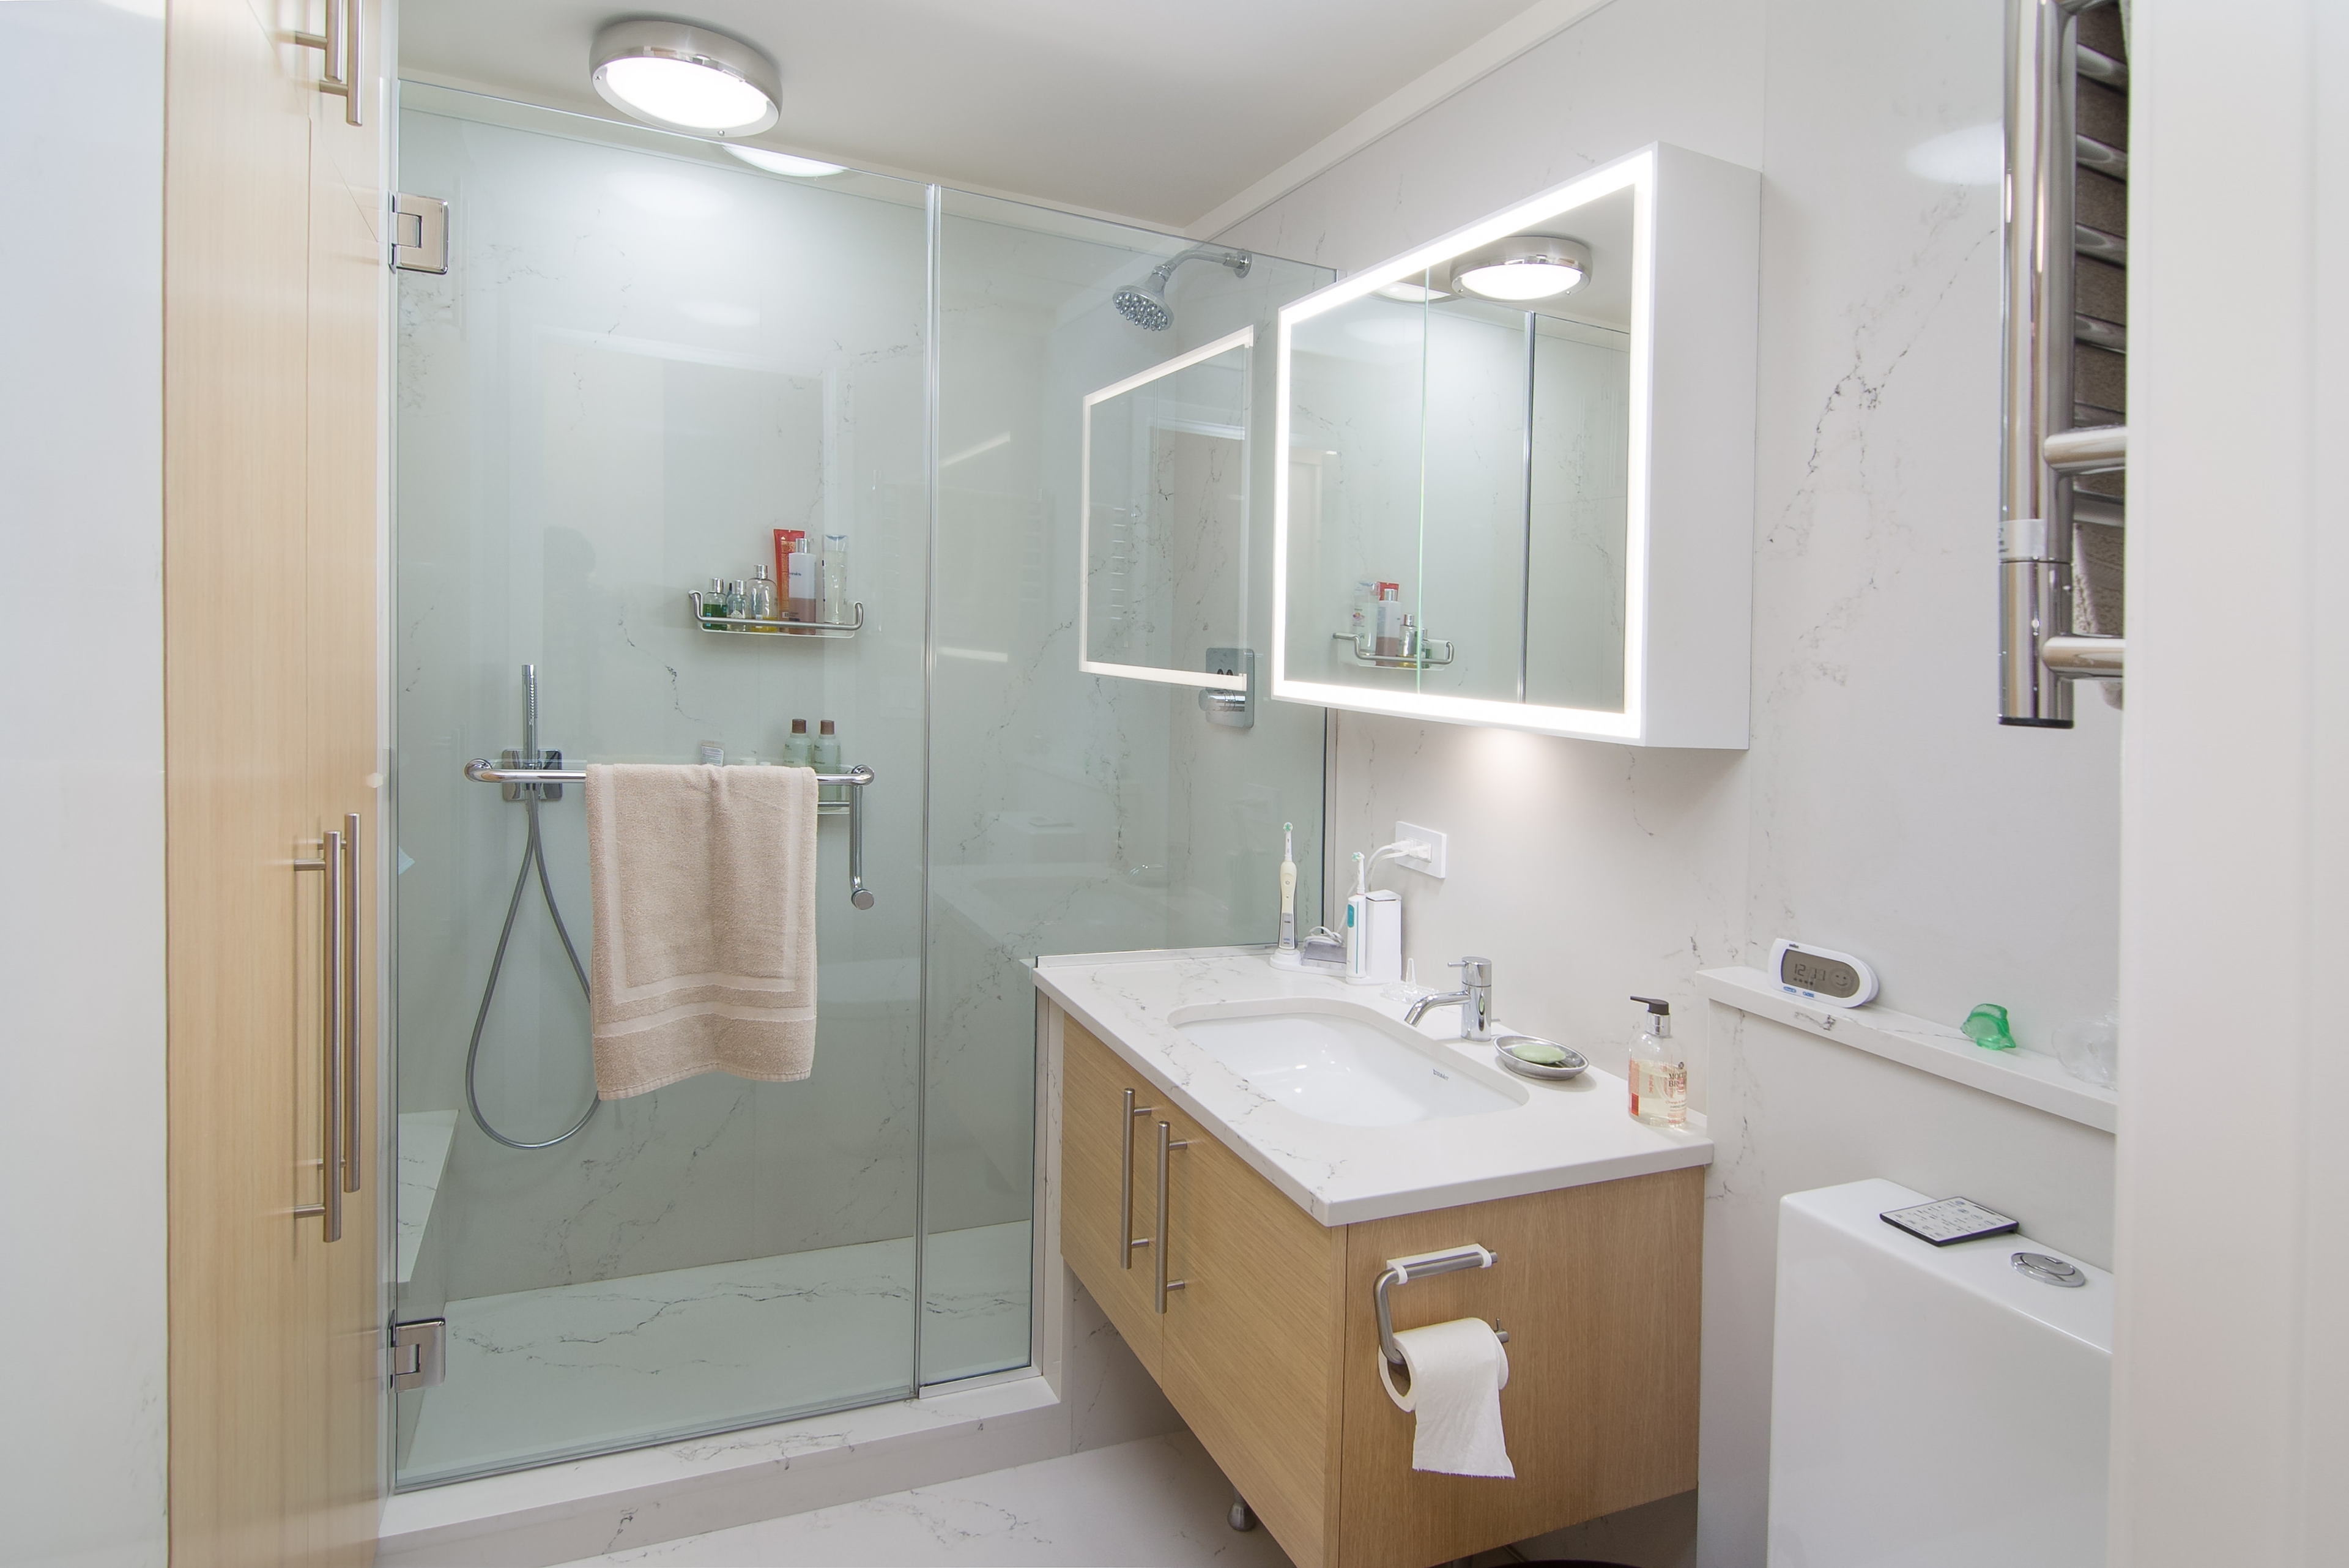 Renovated modern bathroom showcasing new stones, modern light fixtures, a walk-in shower, new bathroom cabinets, and a European heating radiator.